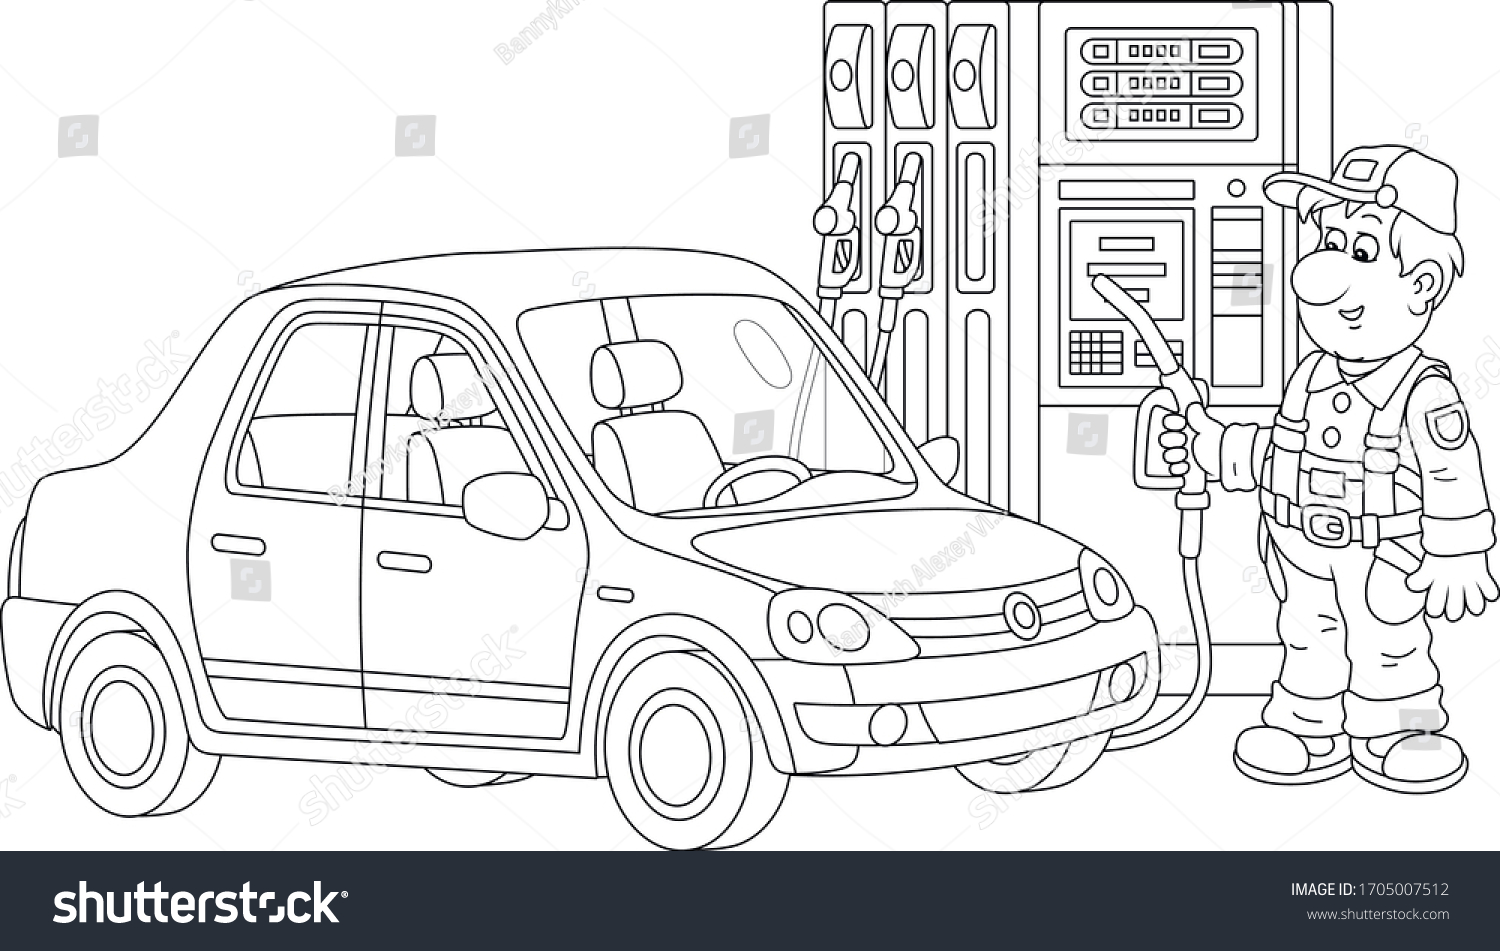 SVG of Car at a gas station with a refueling worker holding a fuel nozzle near a dispenser, black and white outline vector cartoon illustration for a coloring book page svg